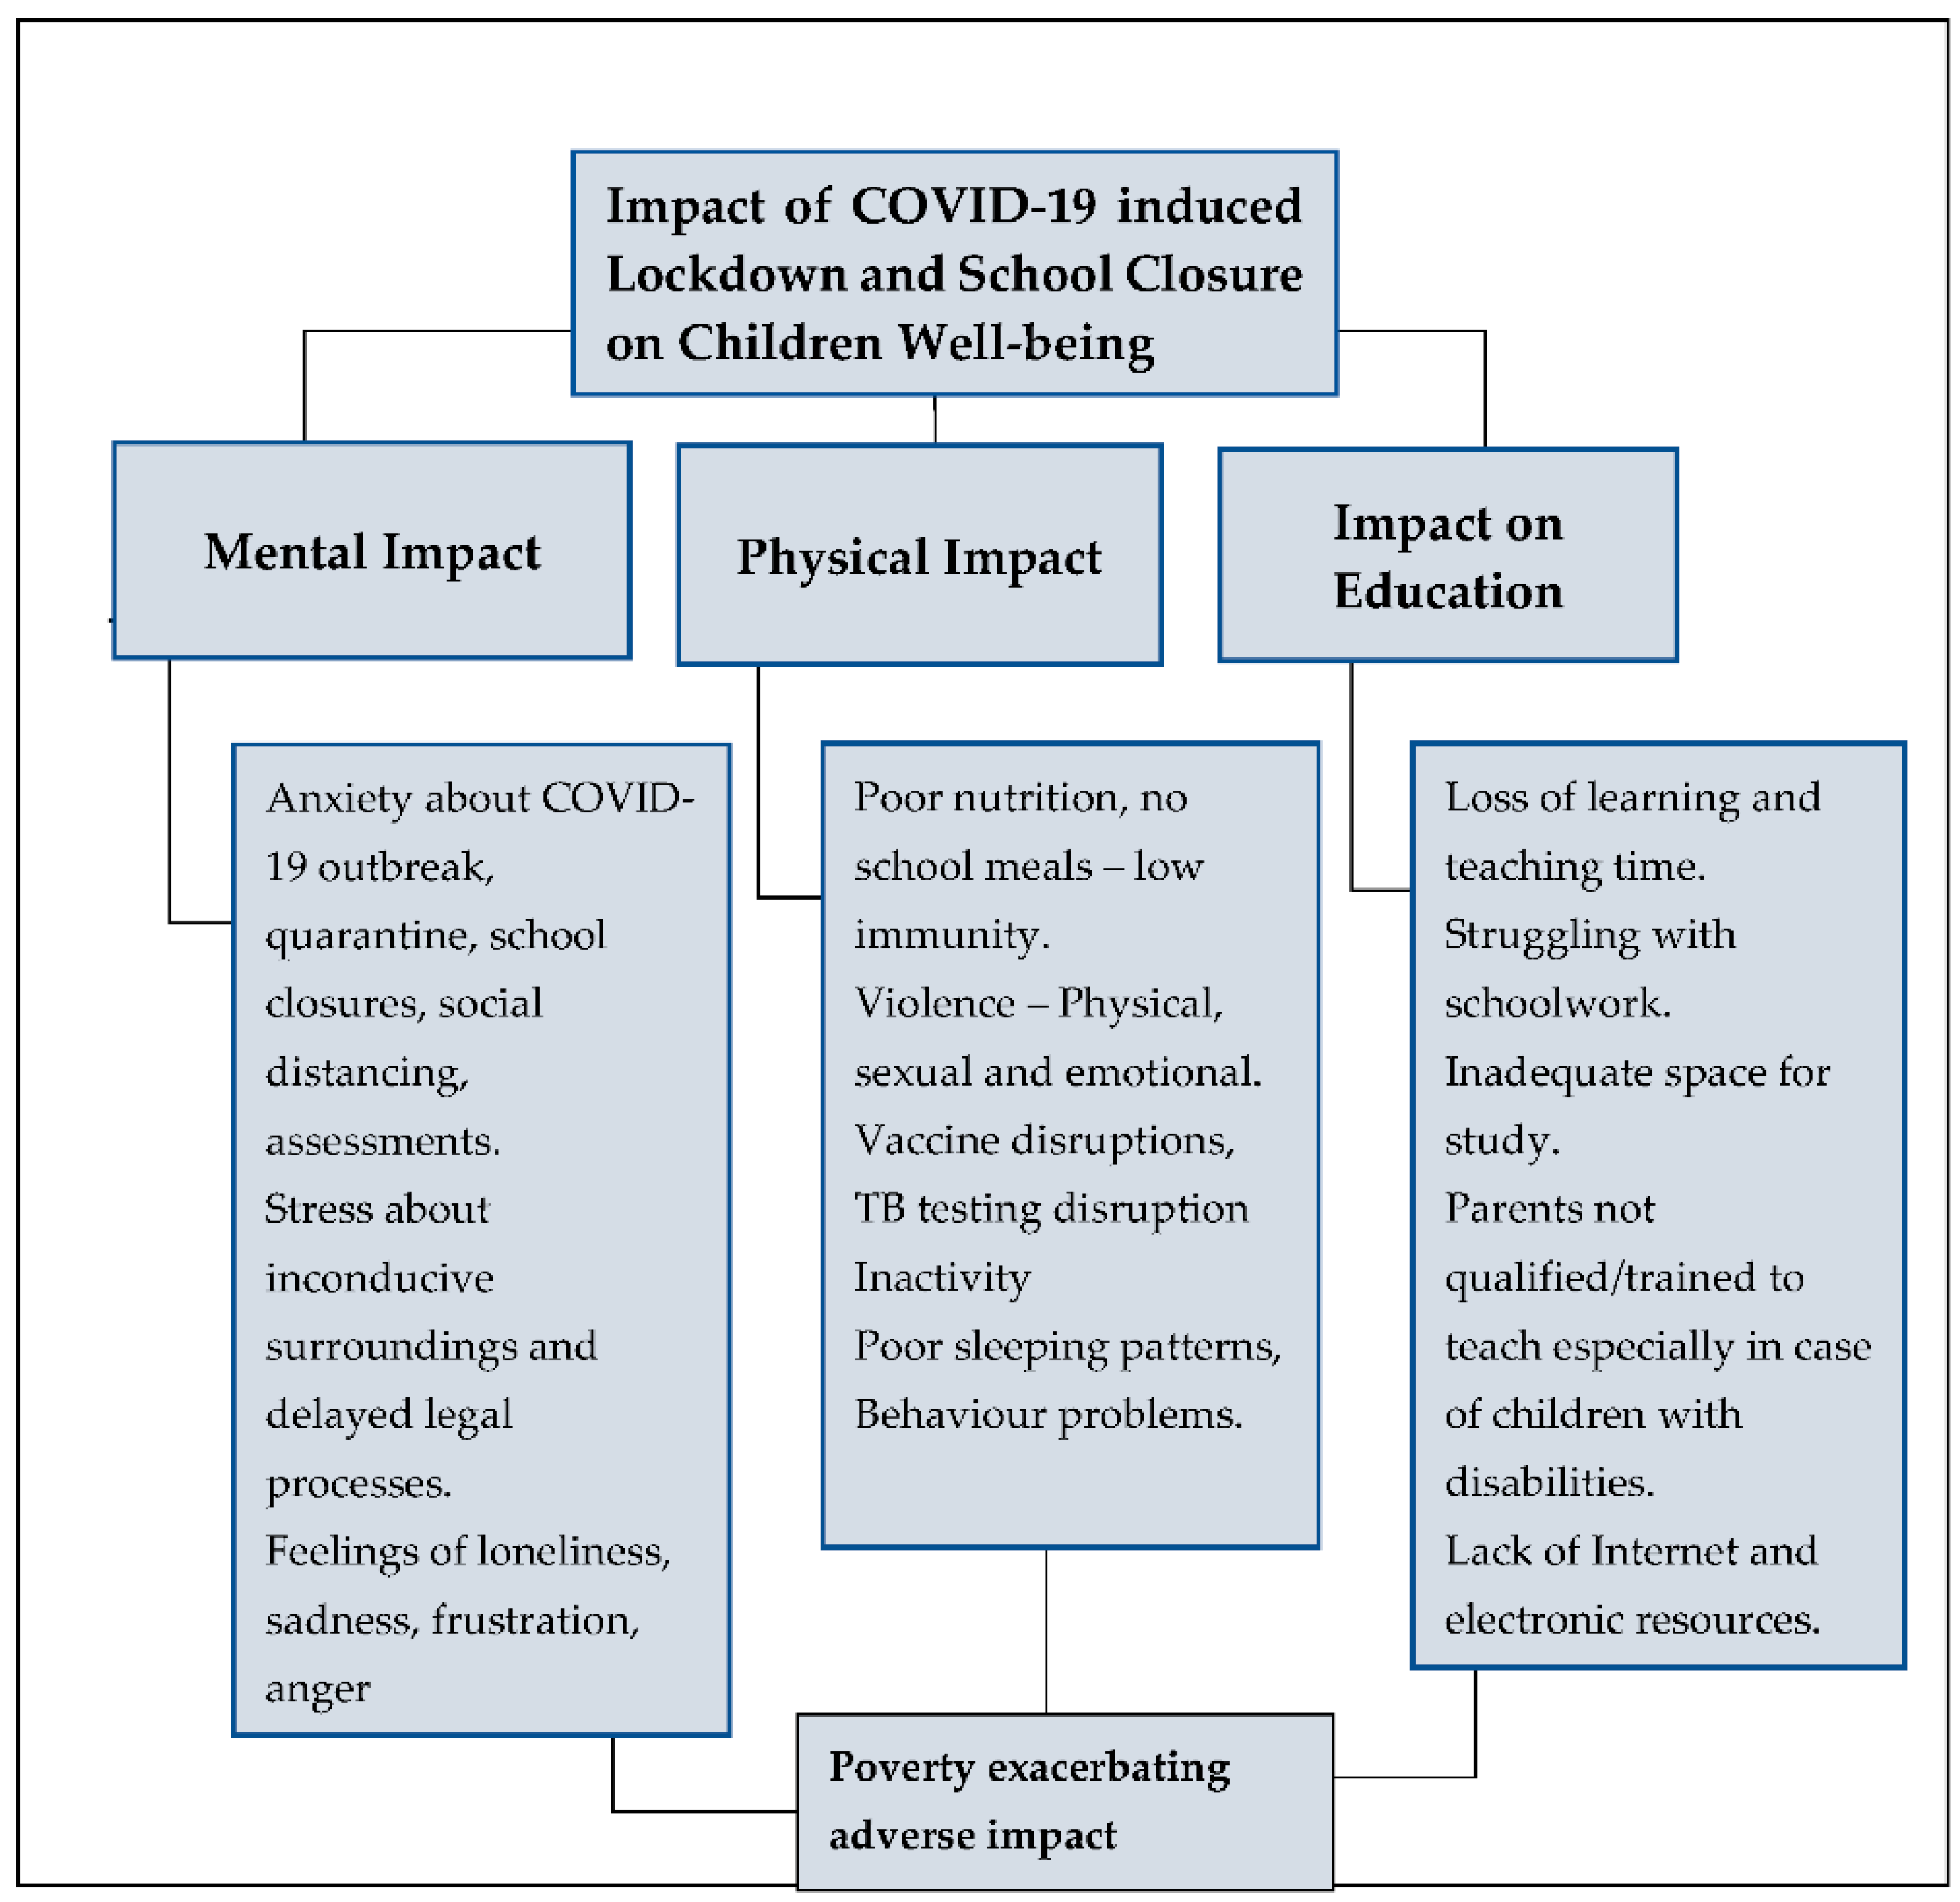 write an essay on impact of covid 19 on family